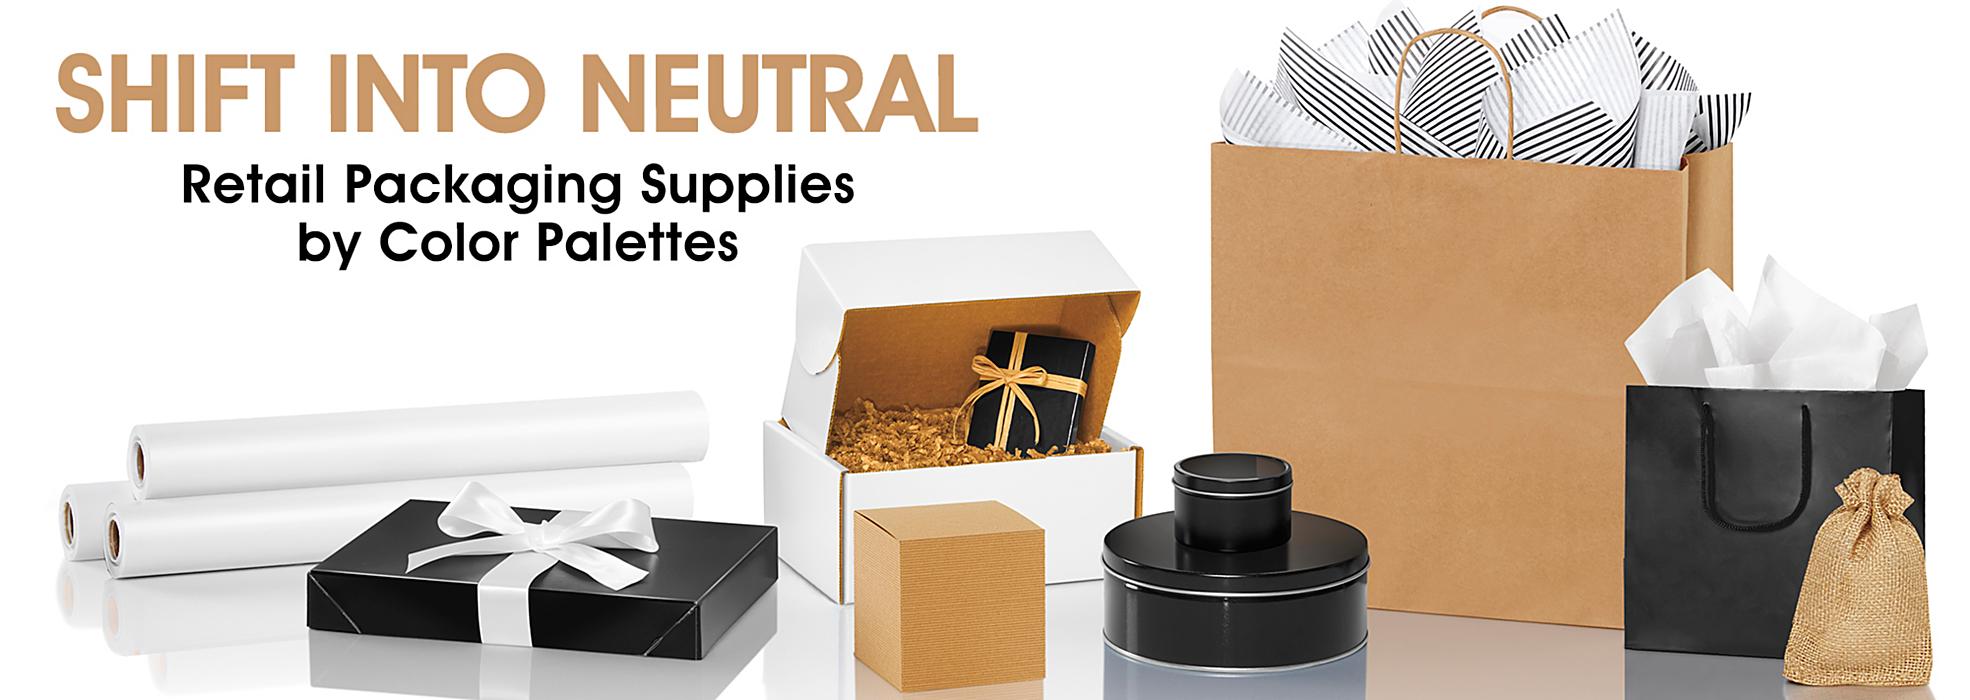 Shift Into Neutral - Retail Packaging Supplies by Color Palettes